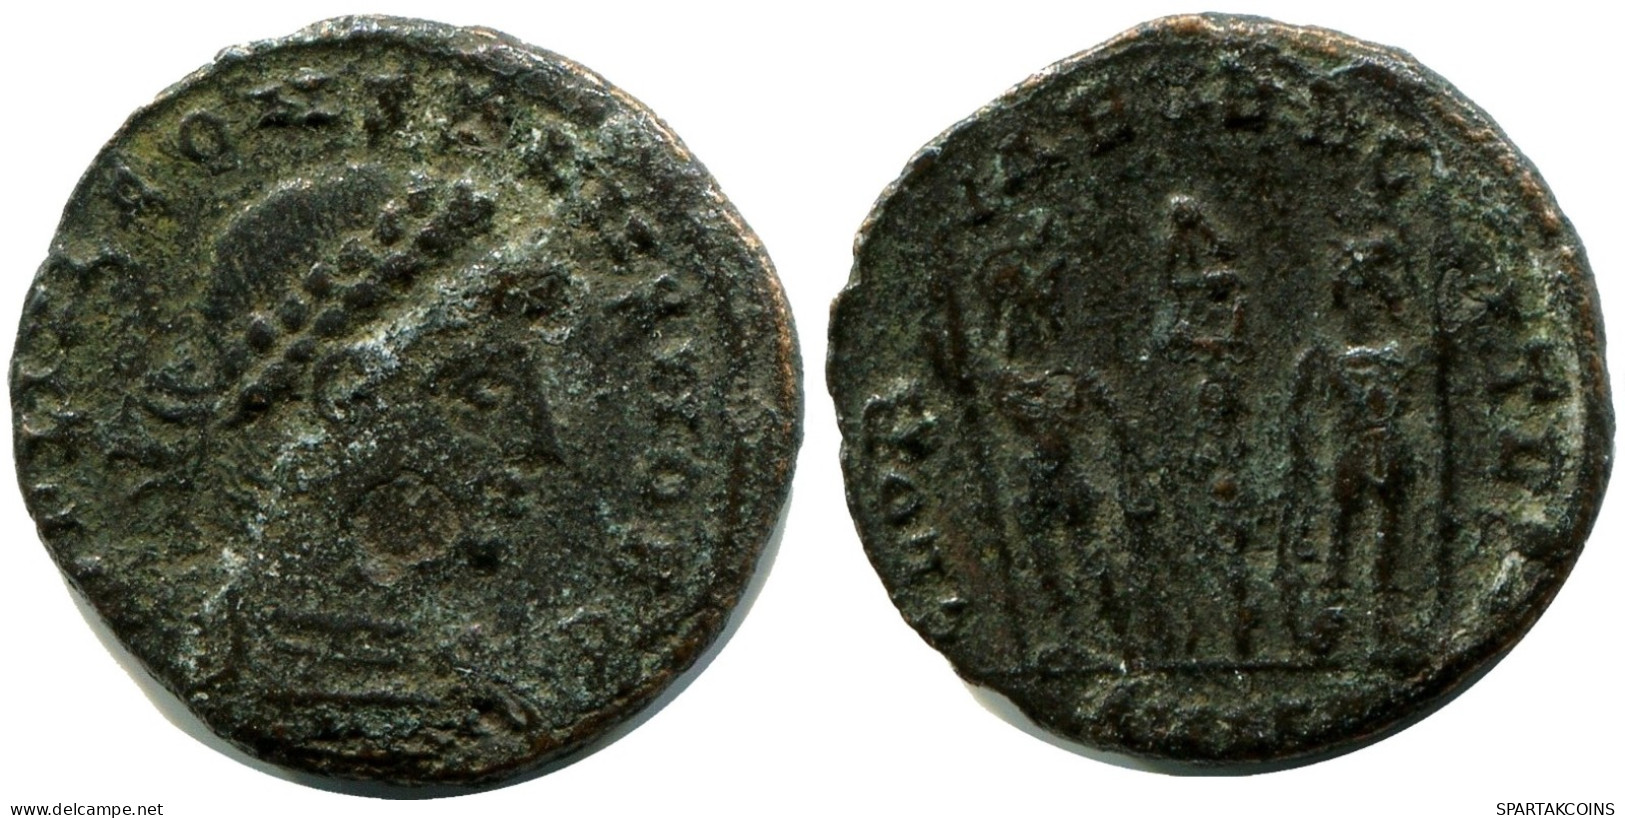 CONSTANS MINTED IN ALEKSANDRIA FROM THE ROYAL ONTARIO MUSEUM #ANC11401.14.F.A - The Christian Empire (307 AD Tot 363 AD)